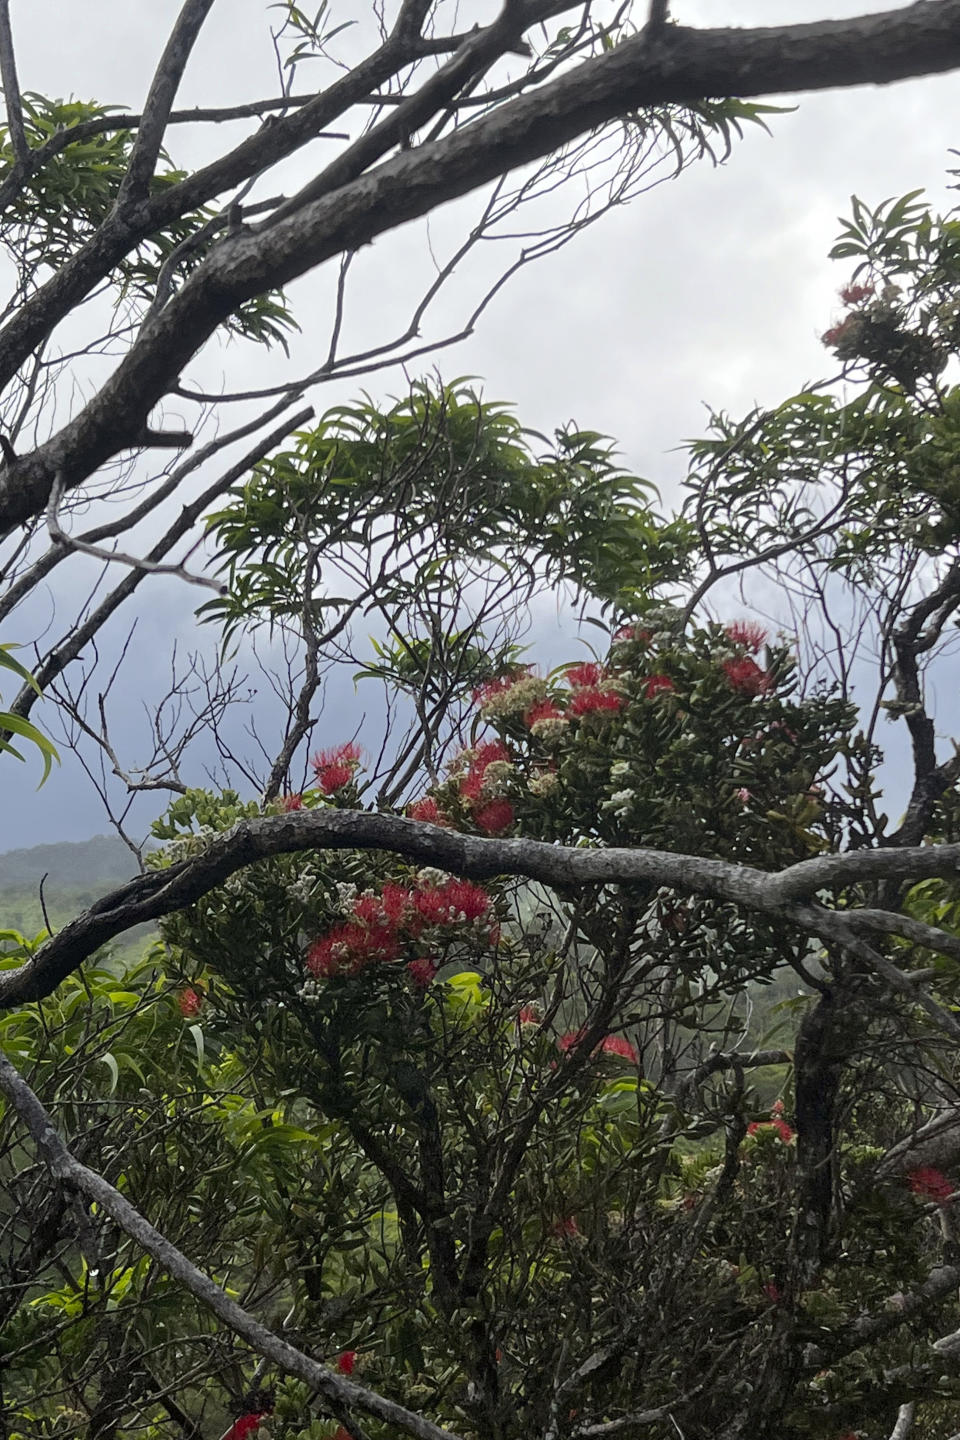 This June 2023 photo, provided by JC Watson, shows koa trees and an ohia tree with blooming red flowers in the Upper Koolau Watershed near Mililani, Hawaii. (JC Watson via AP)